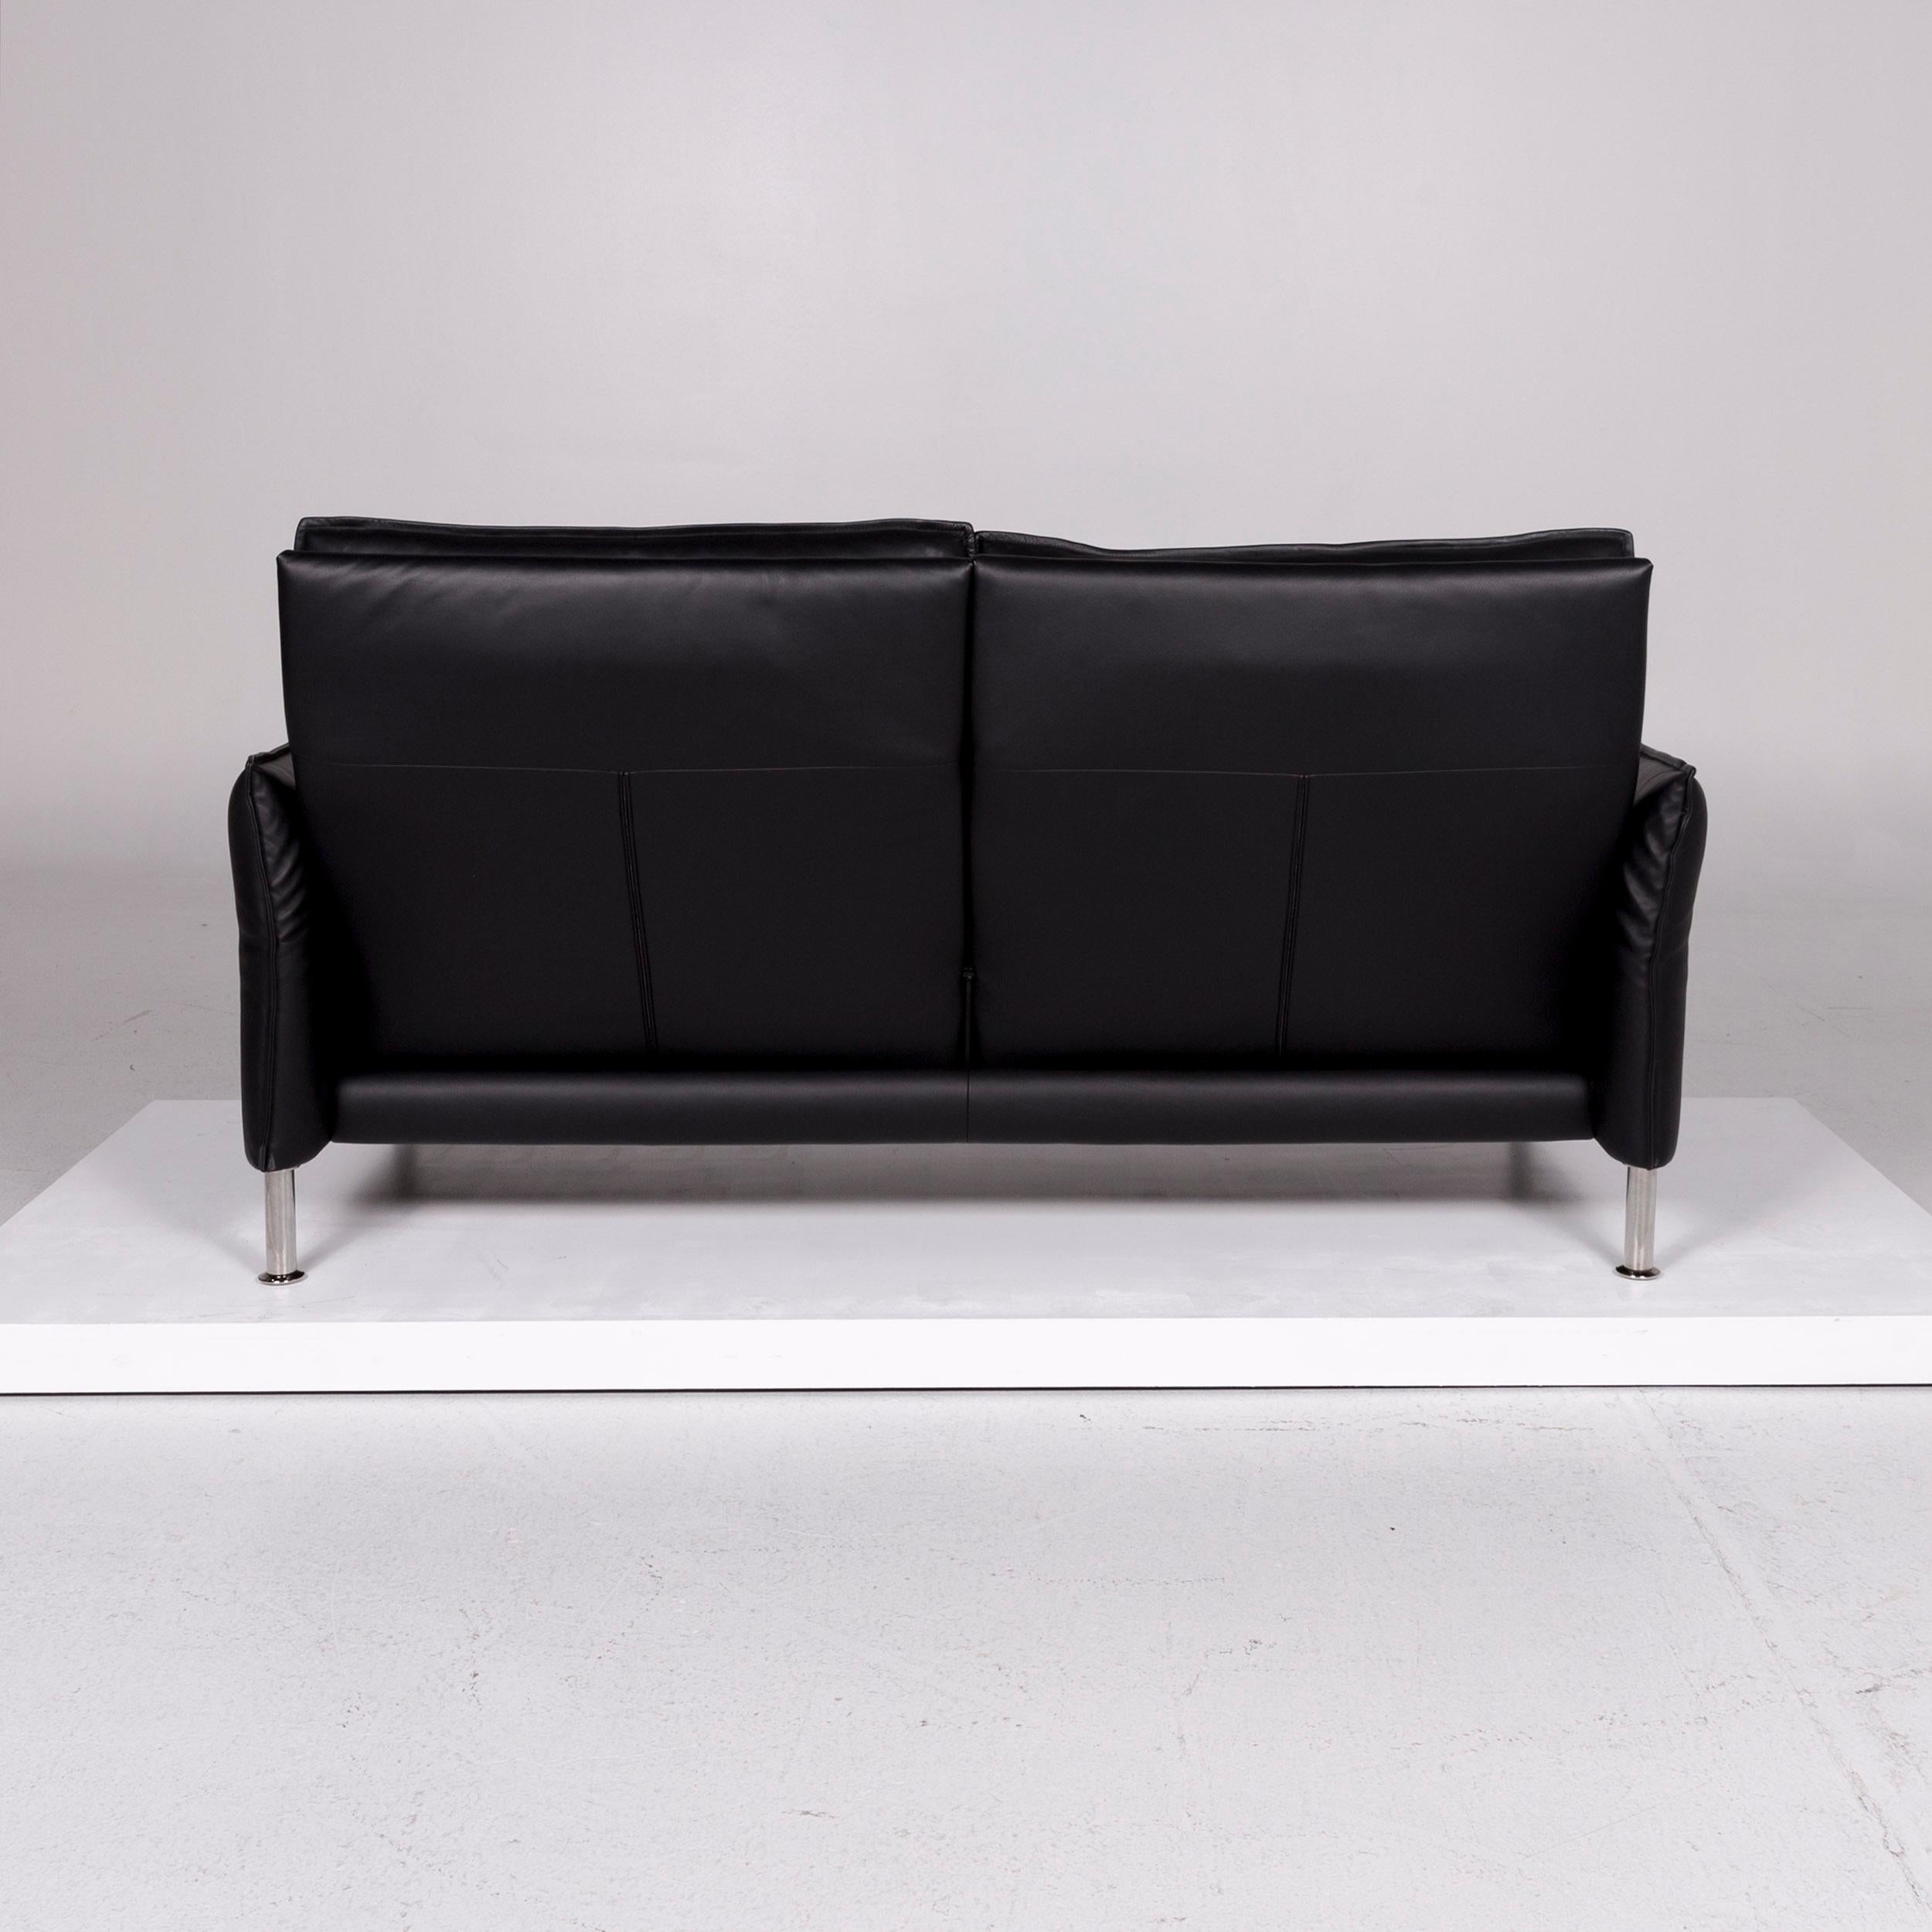 Erpo Porto Leather Sofa Black Two-Seat Relax Function Couch 3